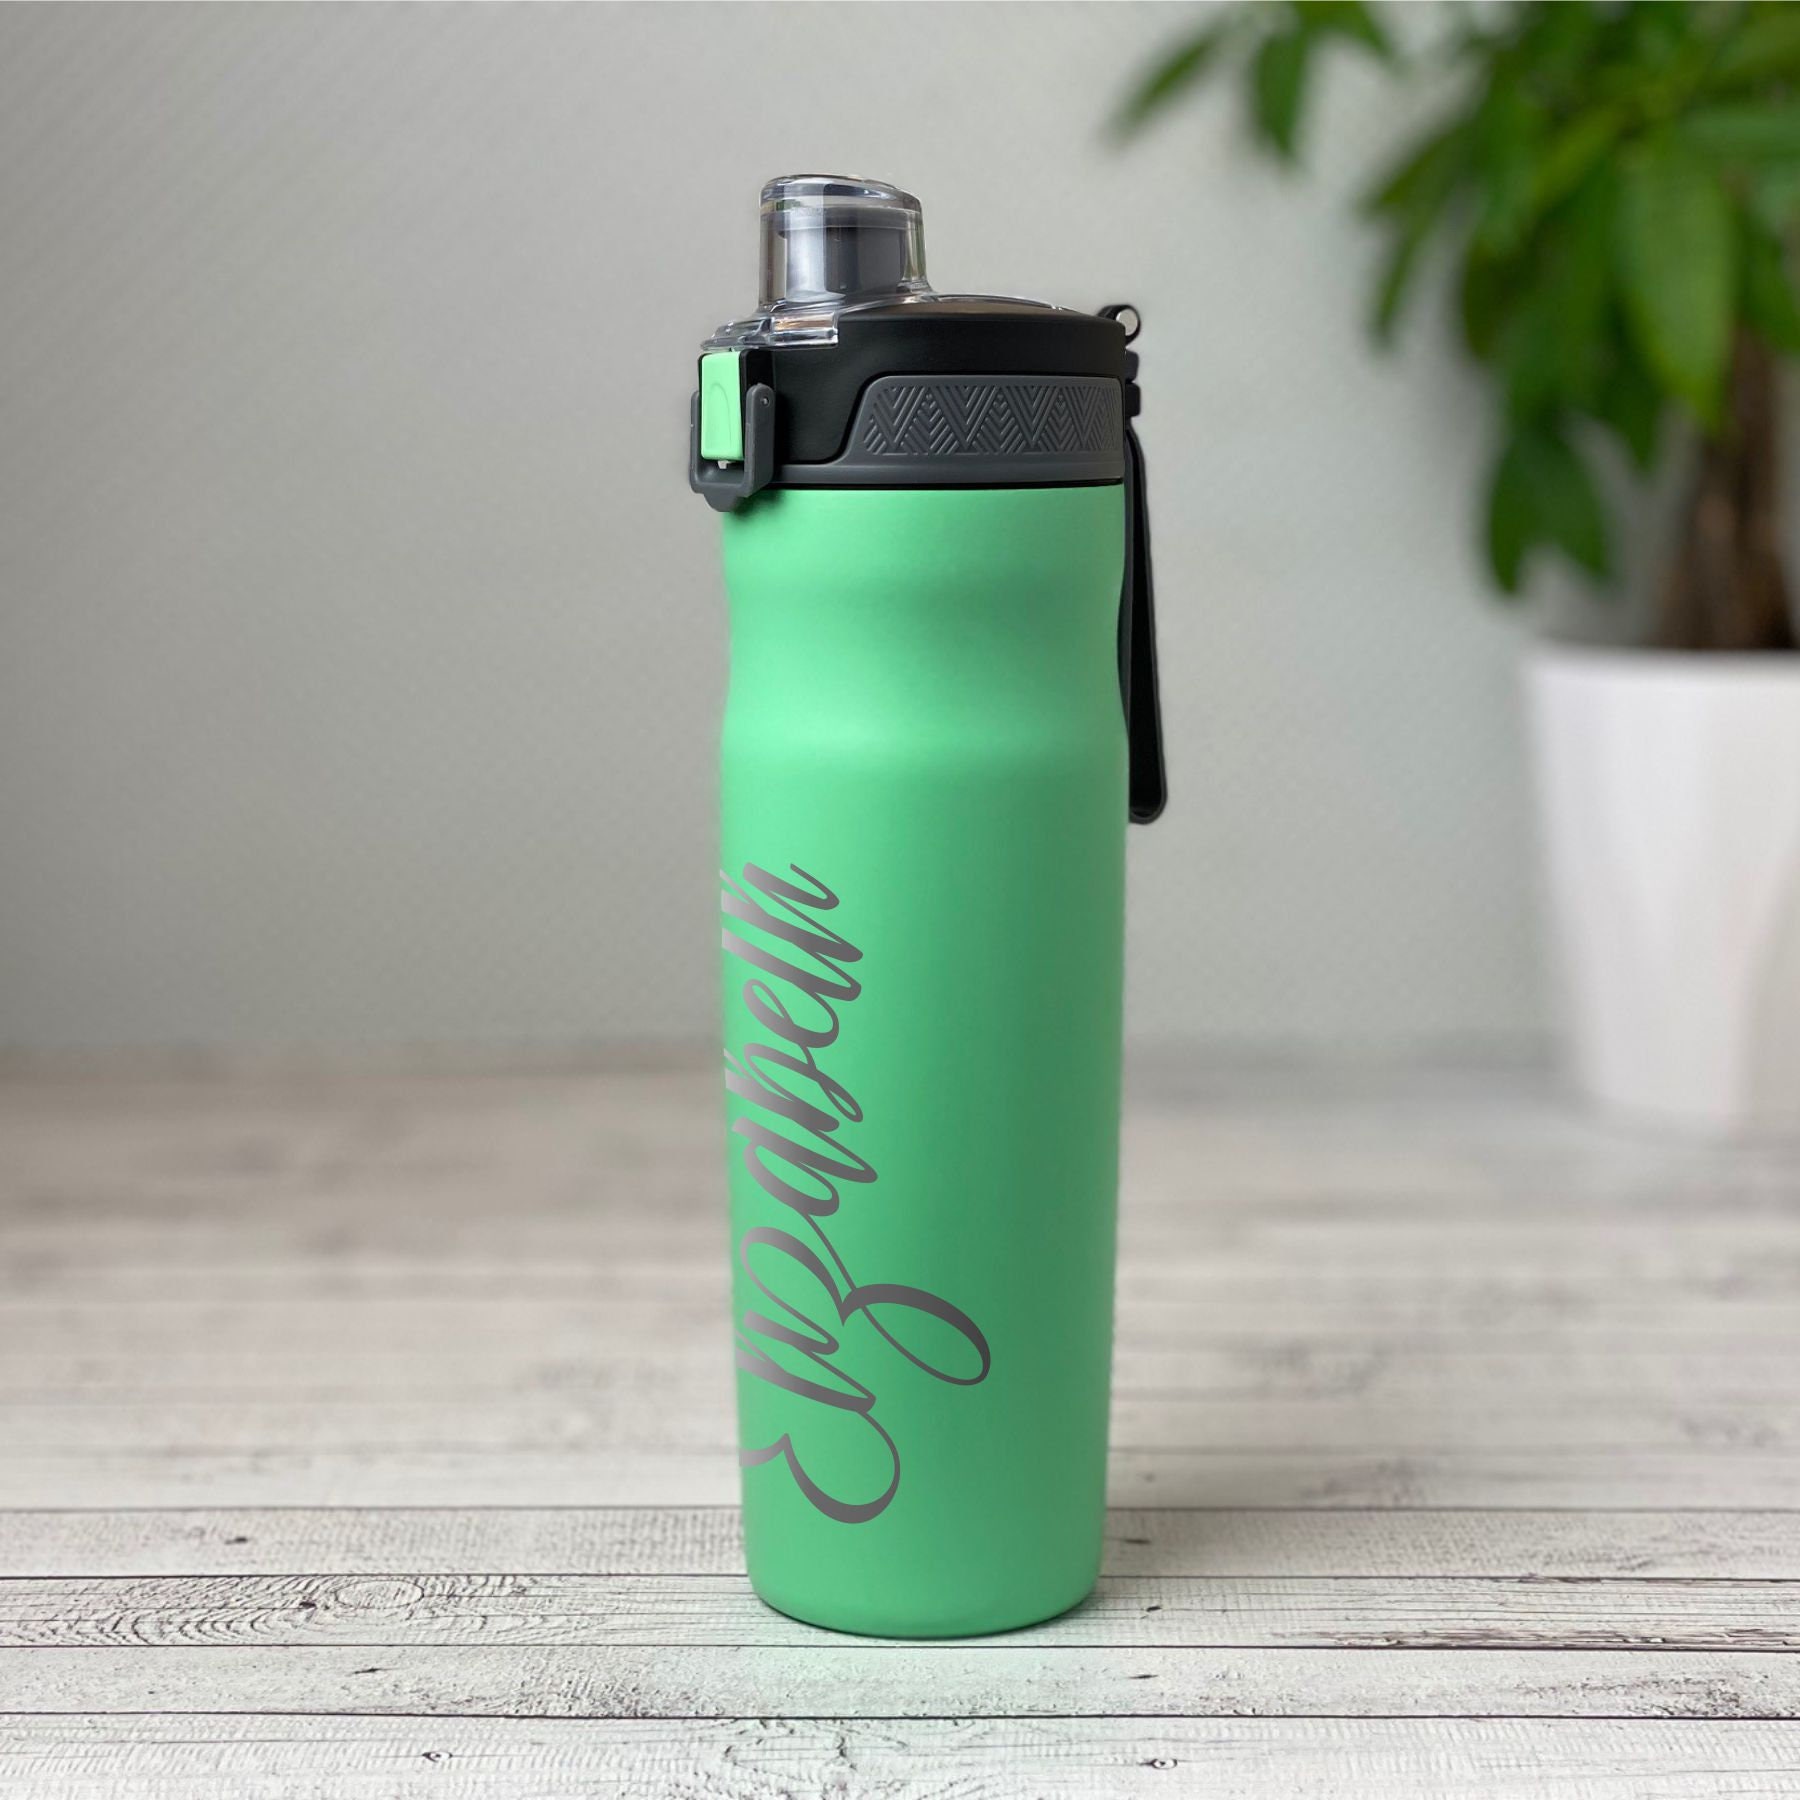 Personalized Reusable Plastic Water Bottles with Stainless Steel Tops and  Bottoms